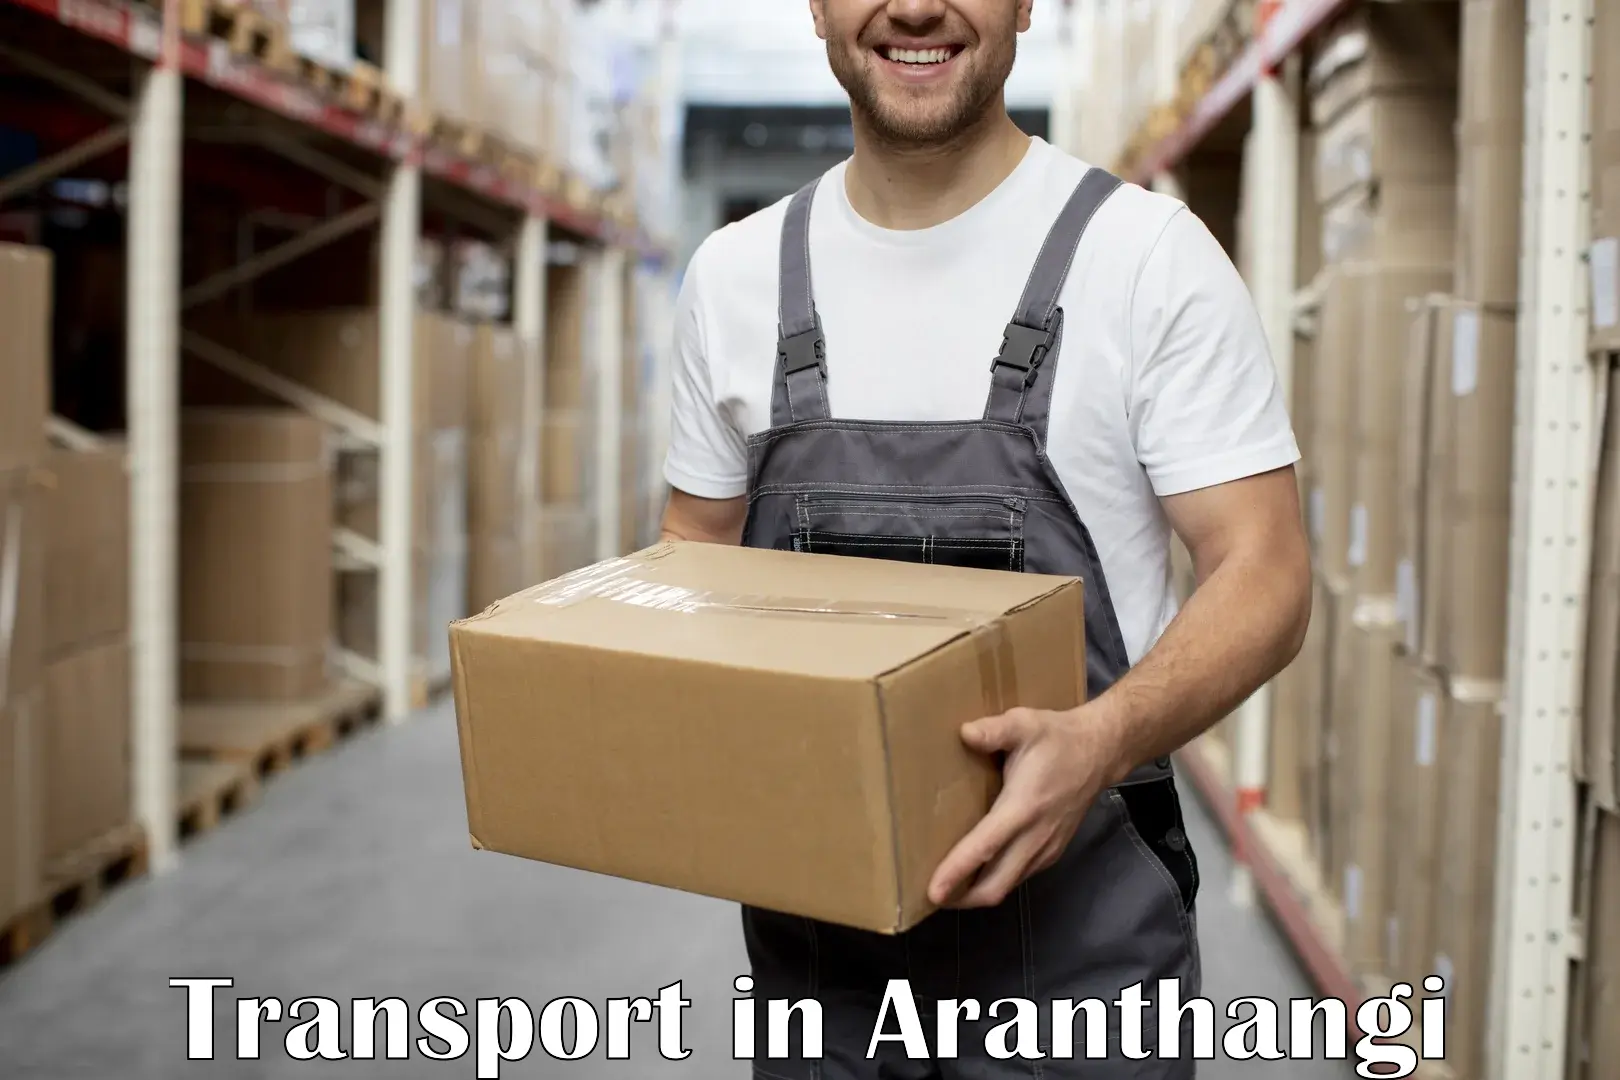 Goods transport services in Aranthangi